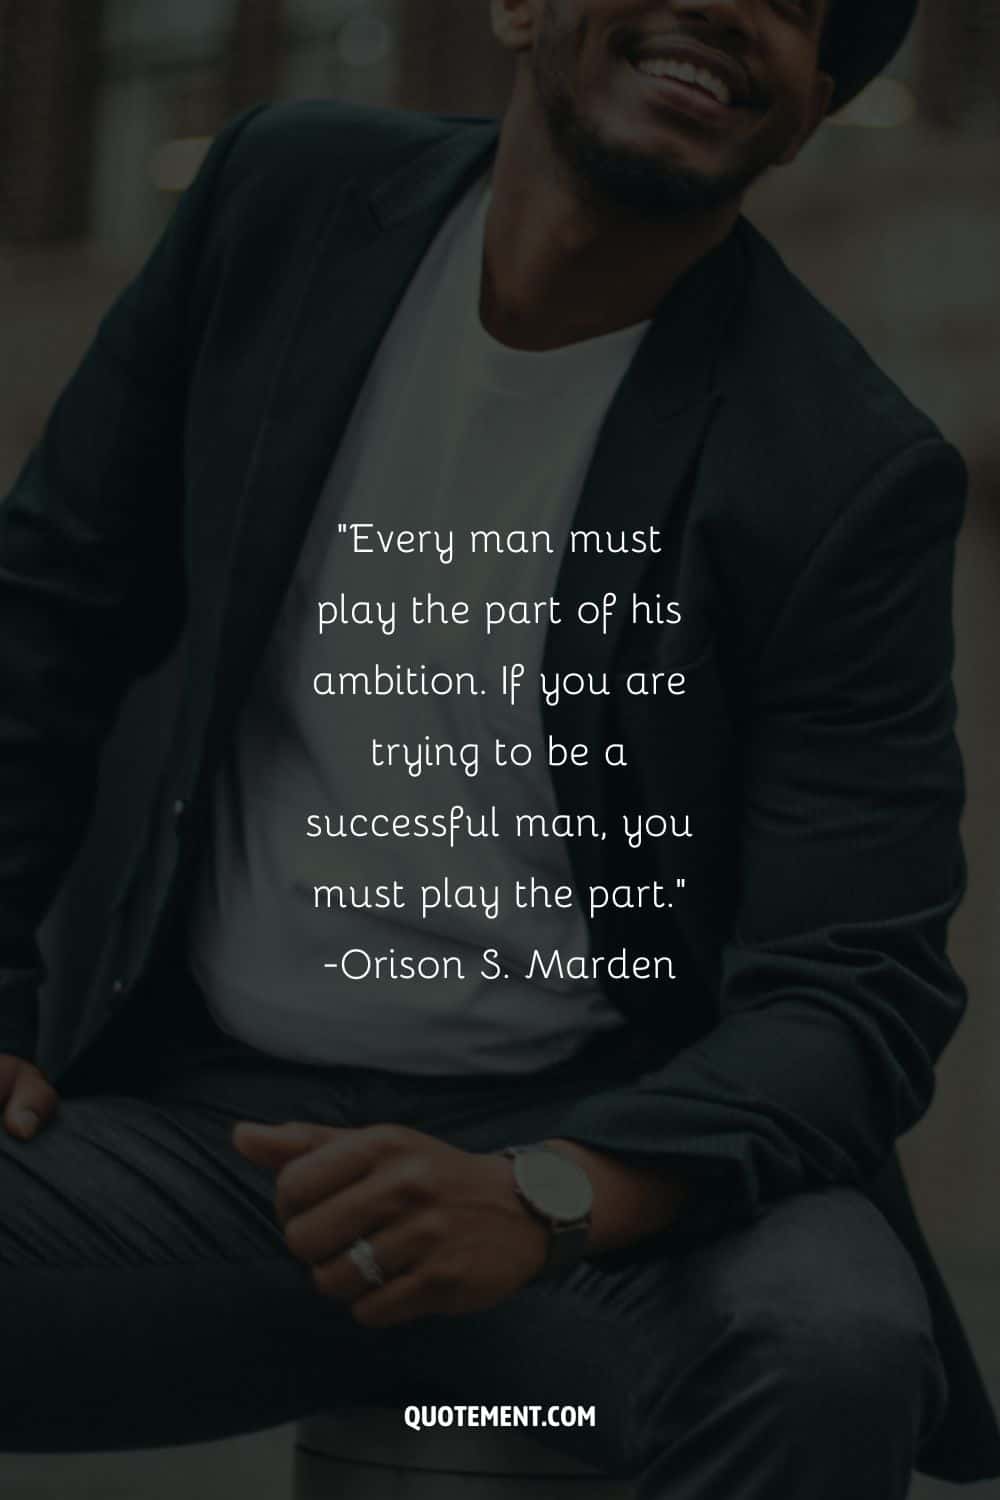 Every man must play the part of his ambition.